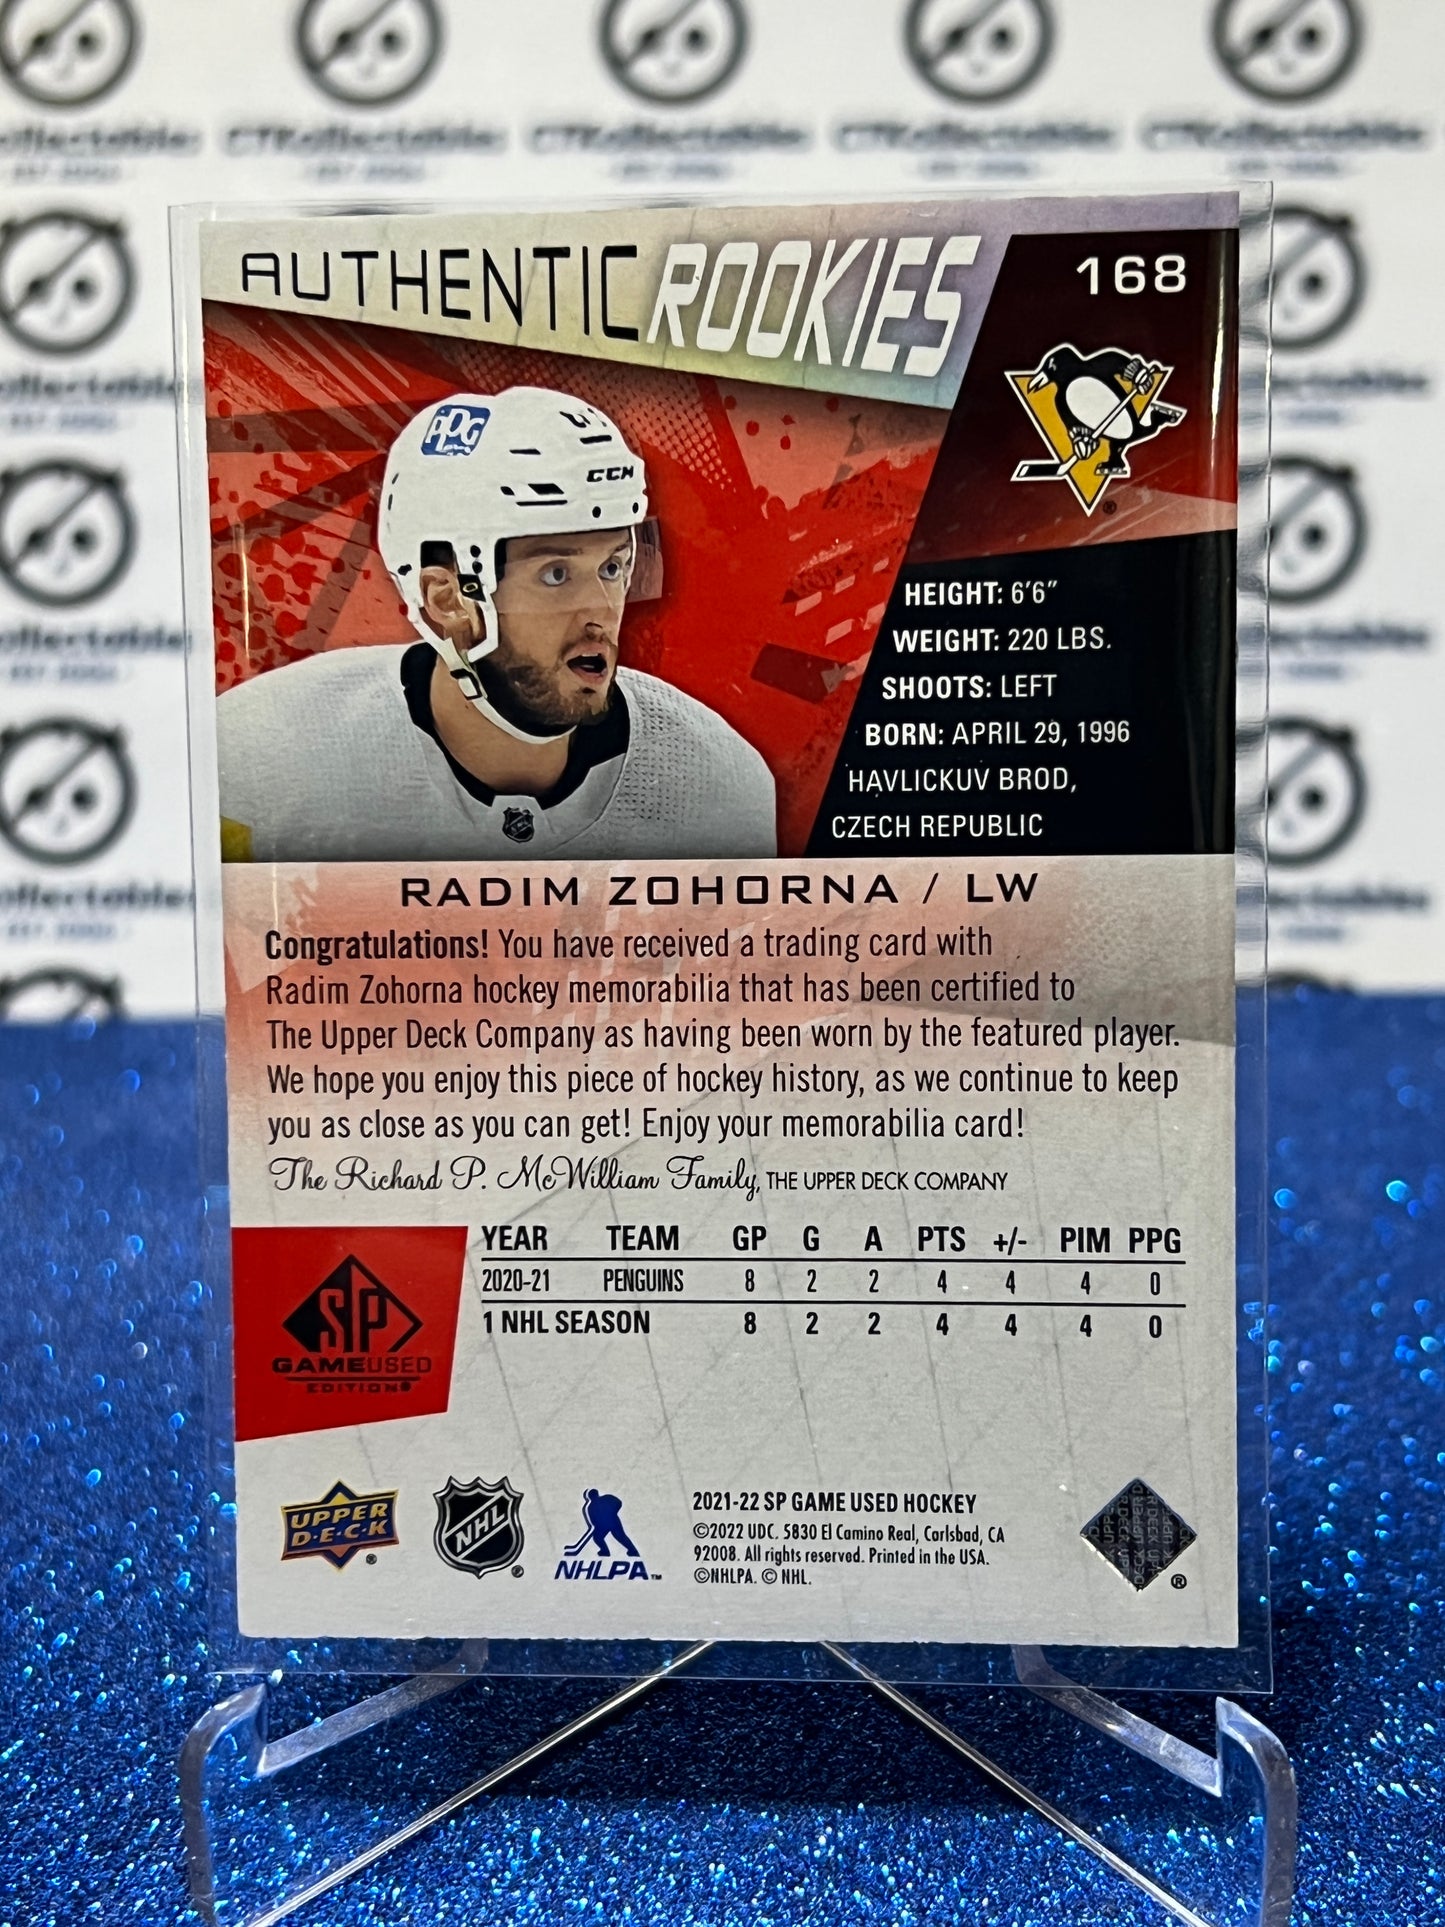 2021-22 UPPER DECK SP RADIM ZOHORNA # 168 AUTHENTIC ROOKIE PATCH RED PITTSBURGH PENGUINS NHL HOCKEY TRADING CARD